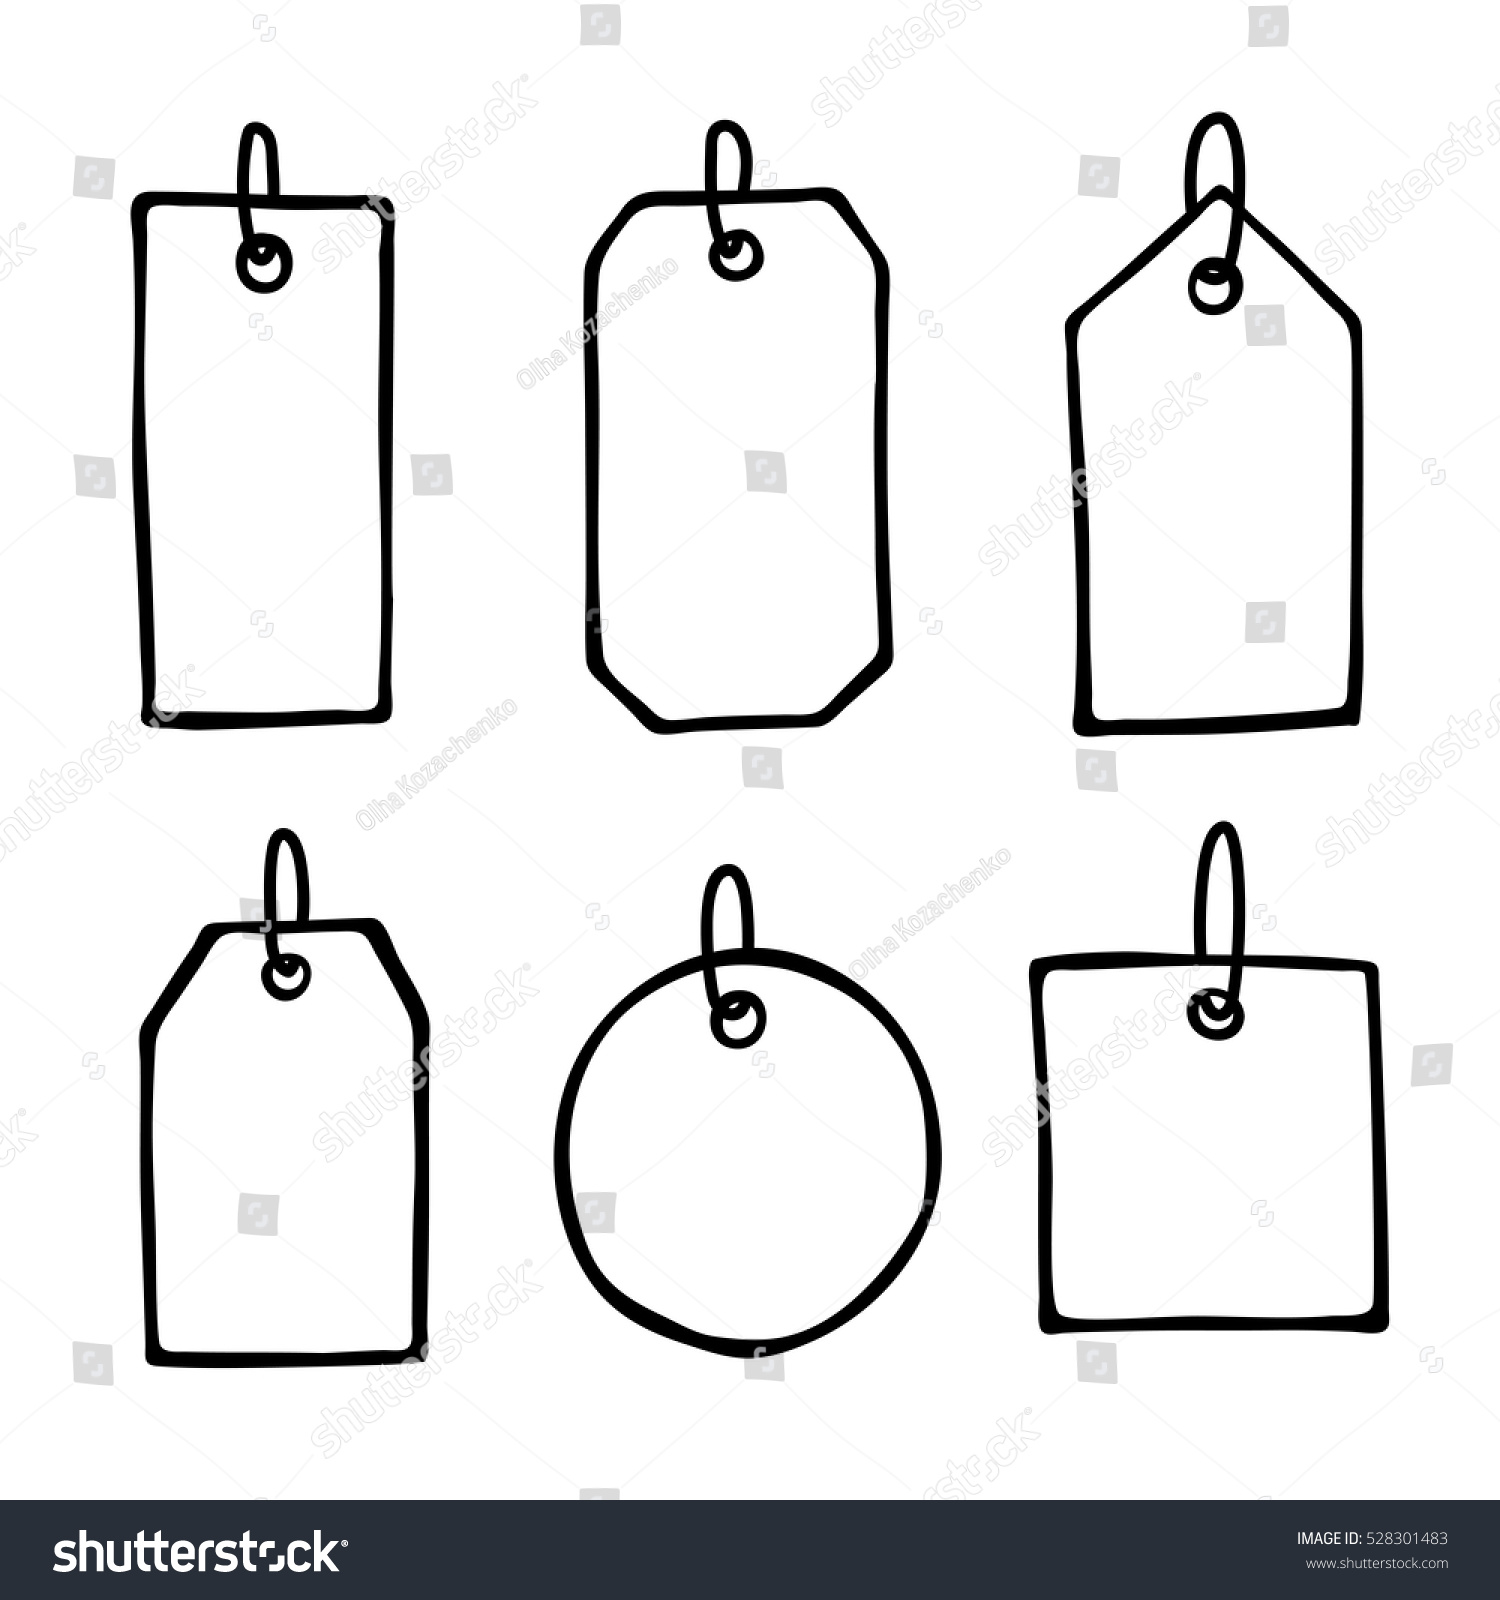 Price tag drawing Images, Stock Photos & Vectors | Shutterstock